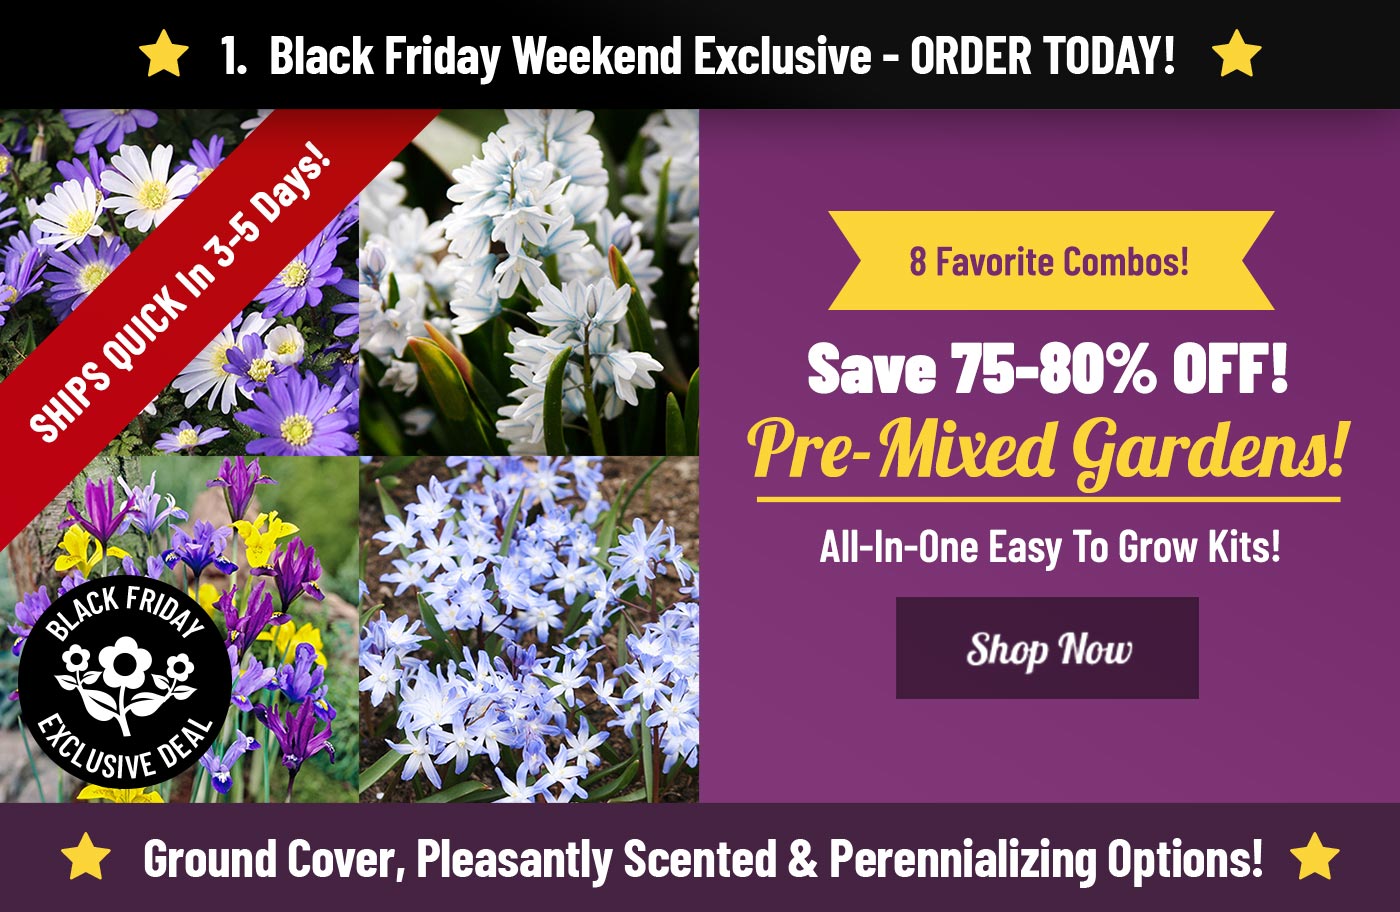 Shop NEW Pre-Mixed Gardens on Sale Now!